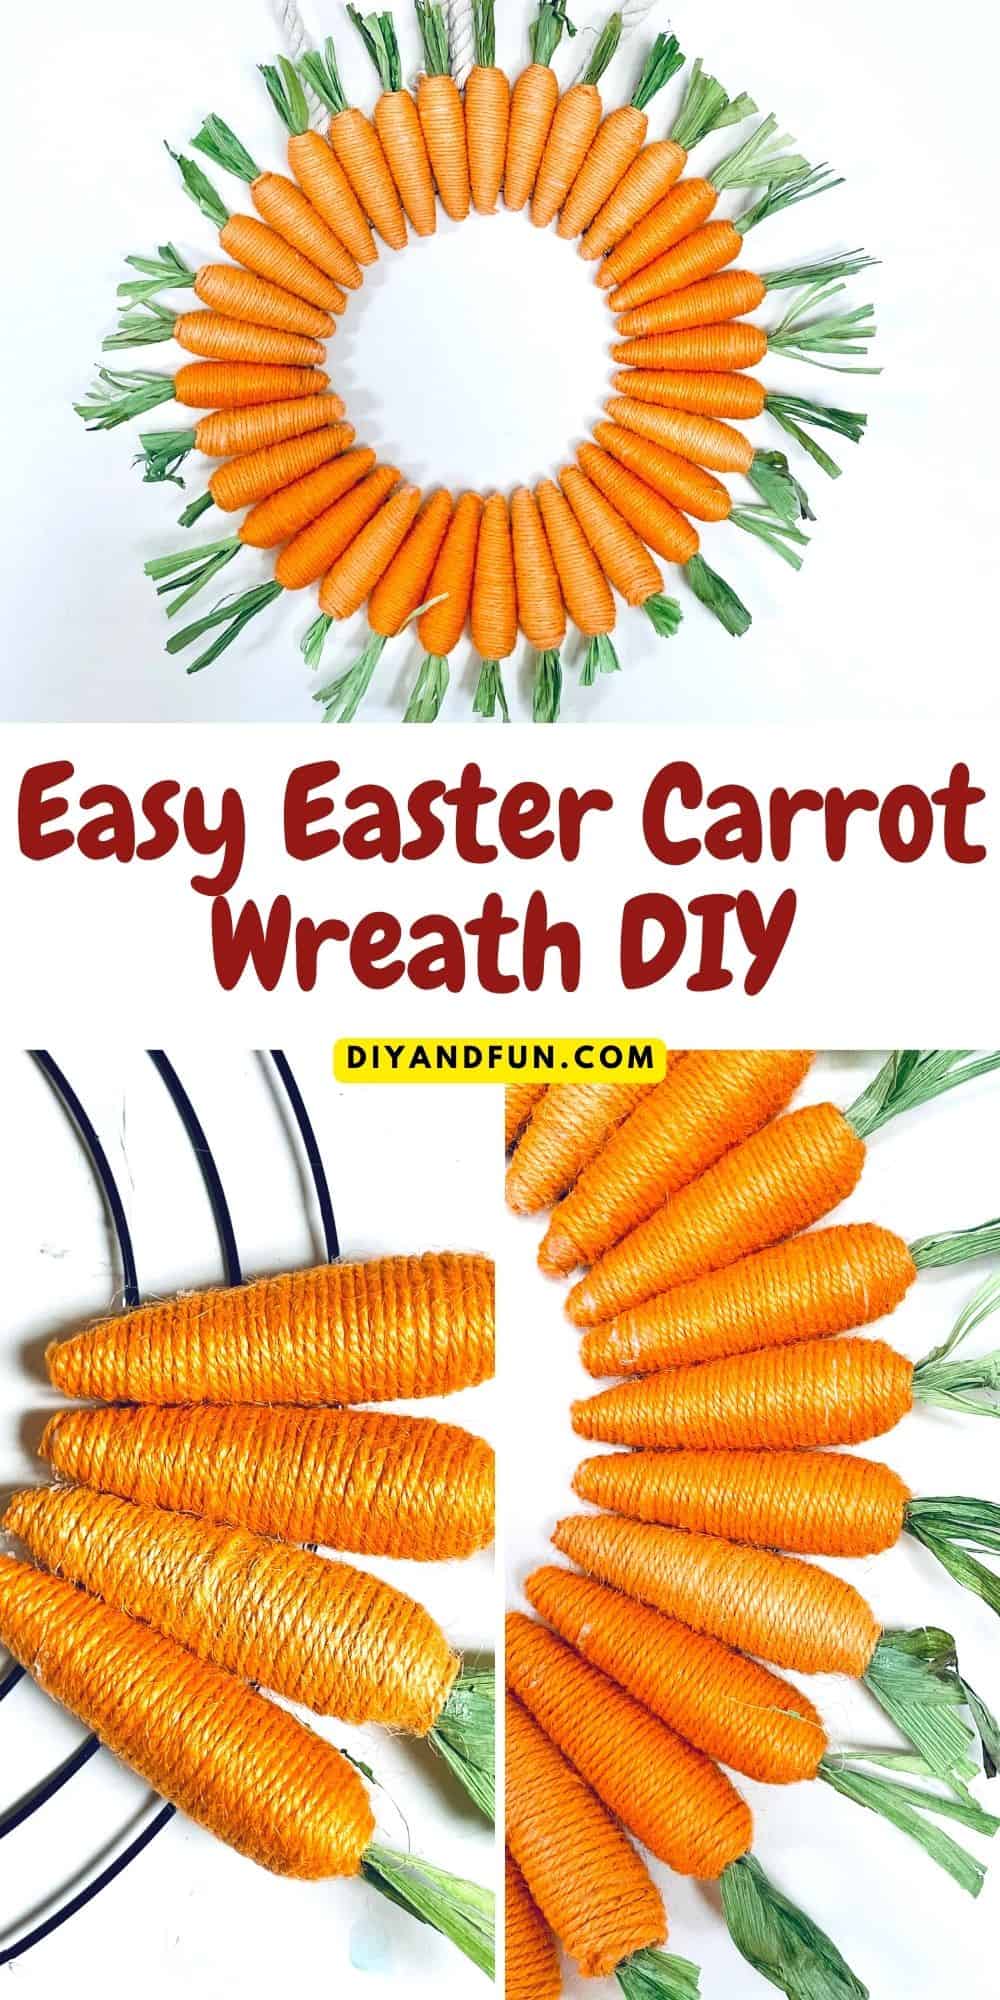 Easy Easter Carrot Wreath DIY, a simple spring craft diy idea that can be made with dollar store materials in less than a half hour.